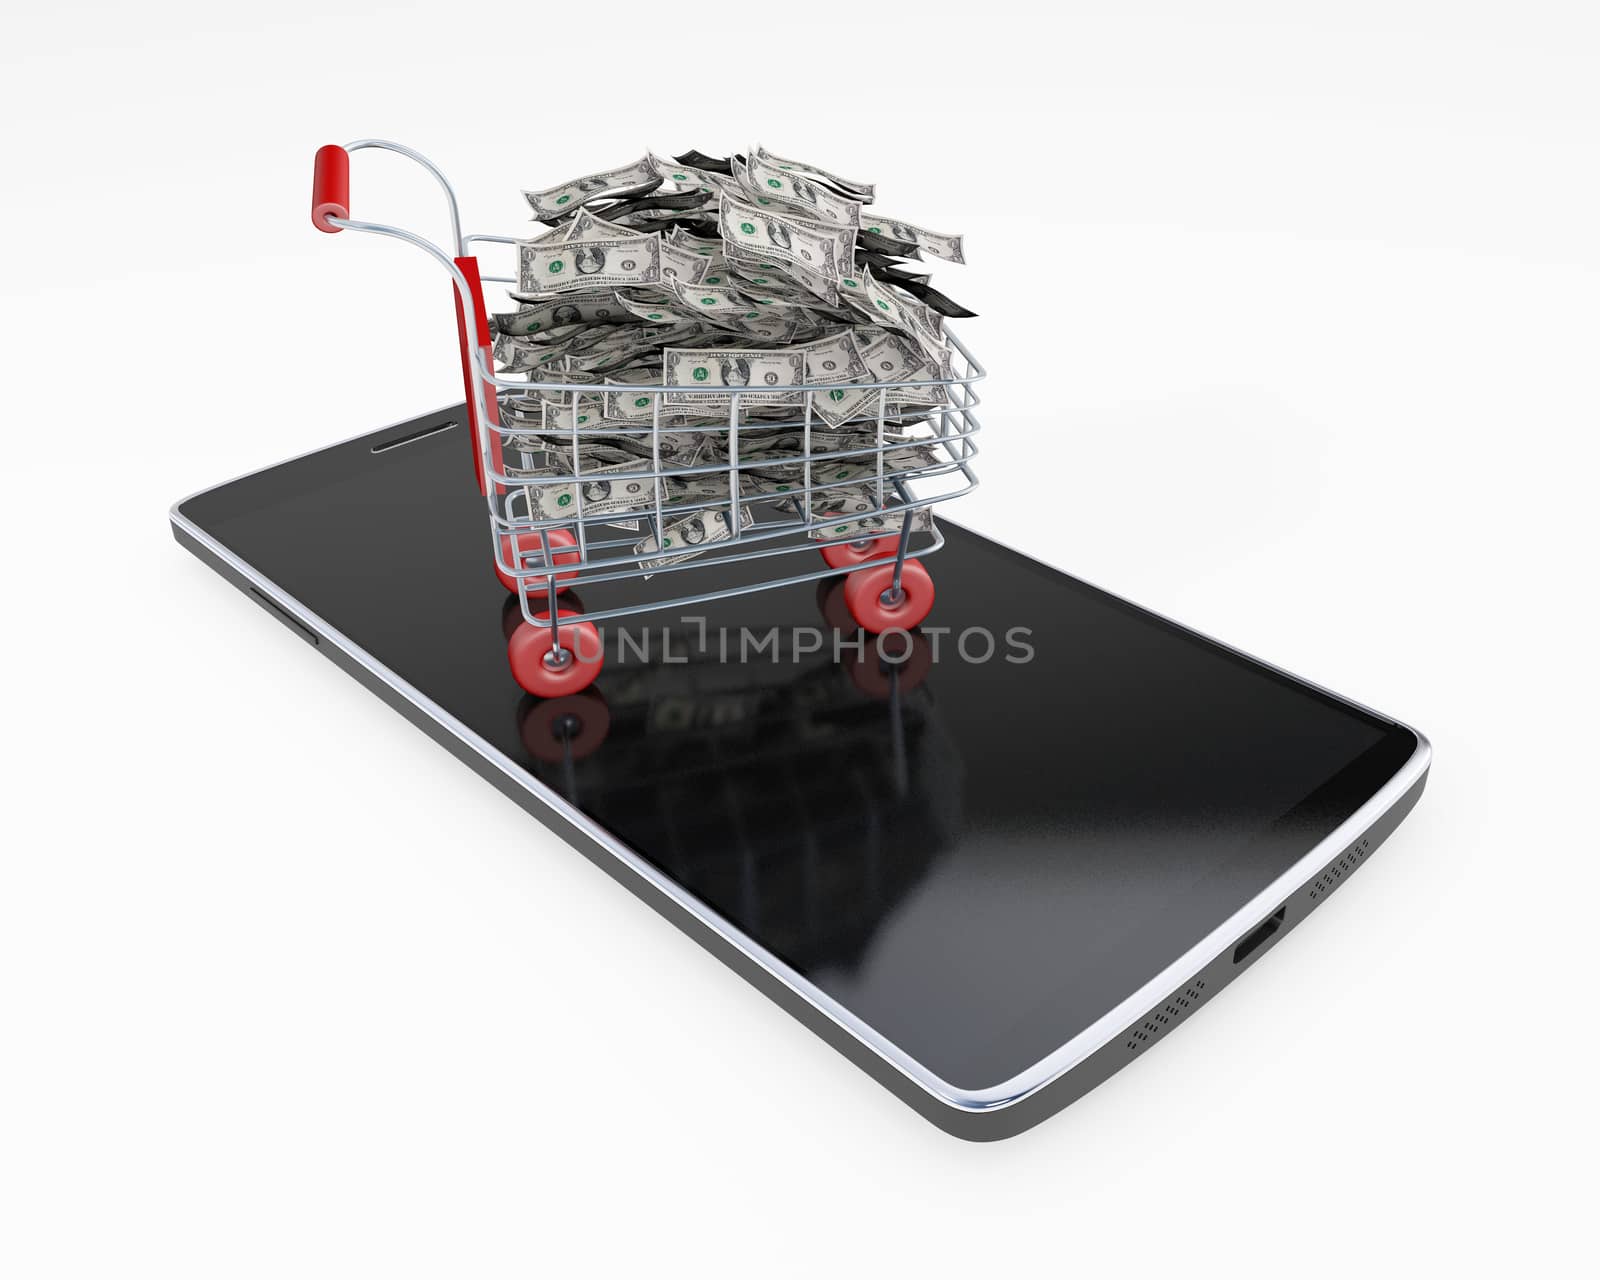 Shopping Cart on a mobile phone full of money 3d rendering by F1b0nacci